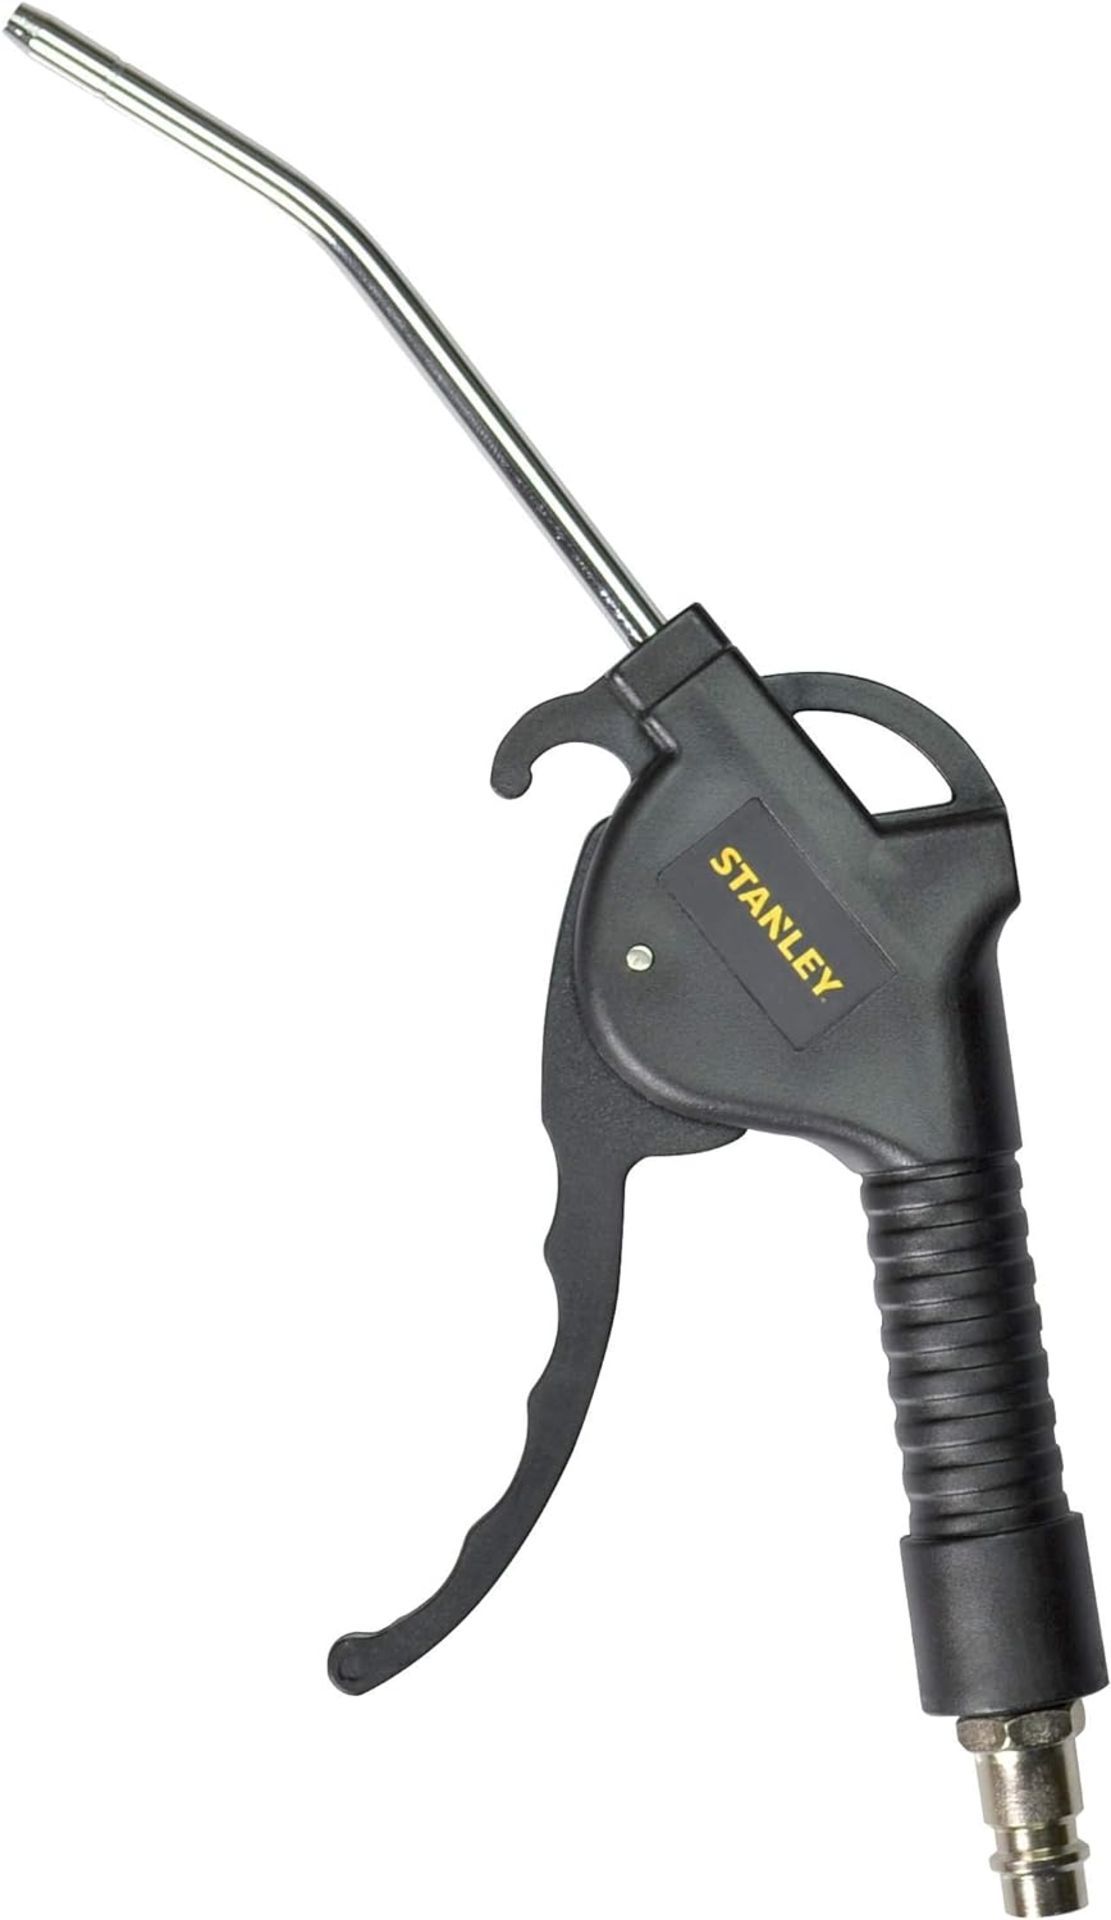 10 X Brand New Stanley Air Blow Gun with Variable Air Flow,